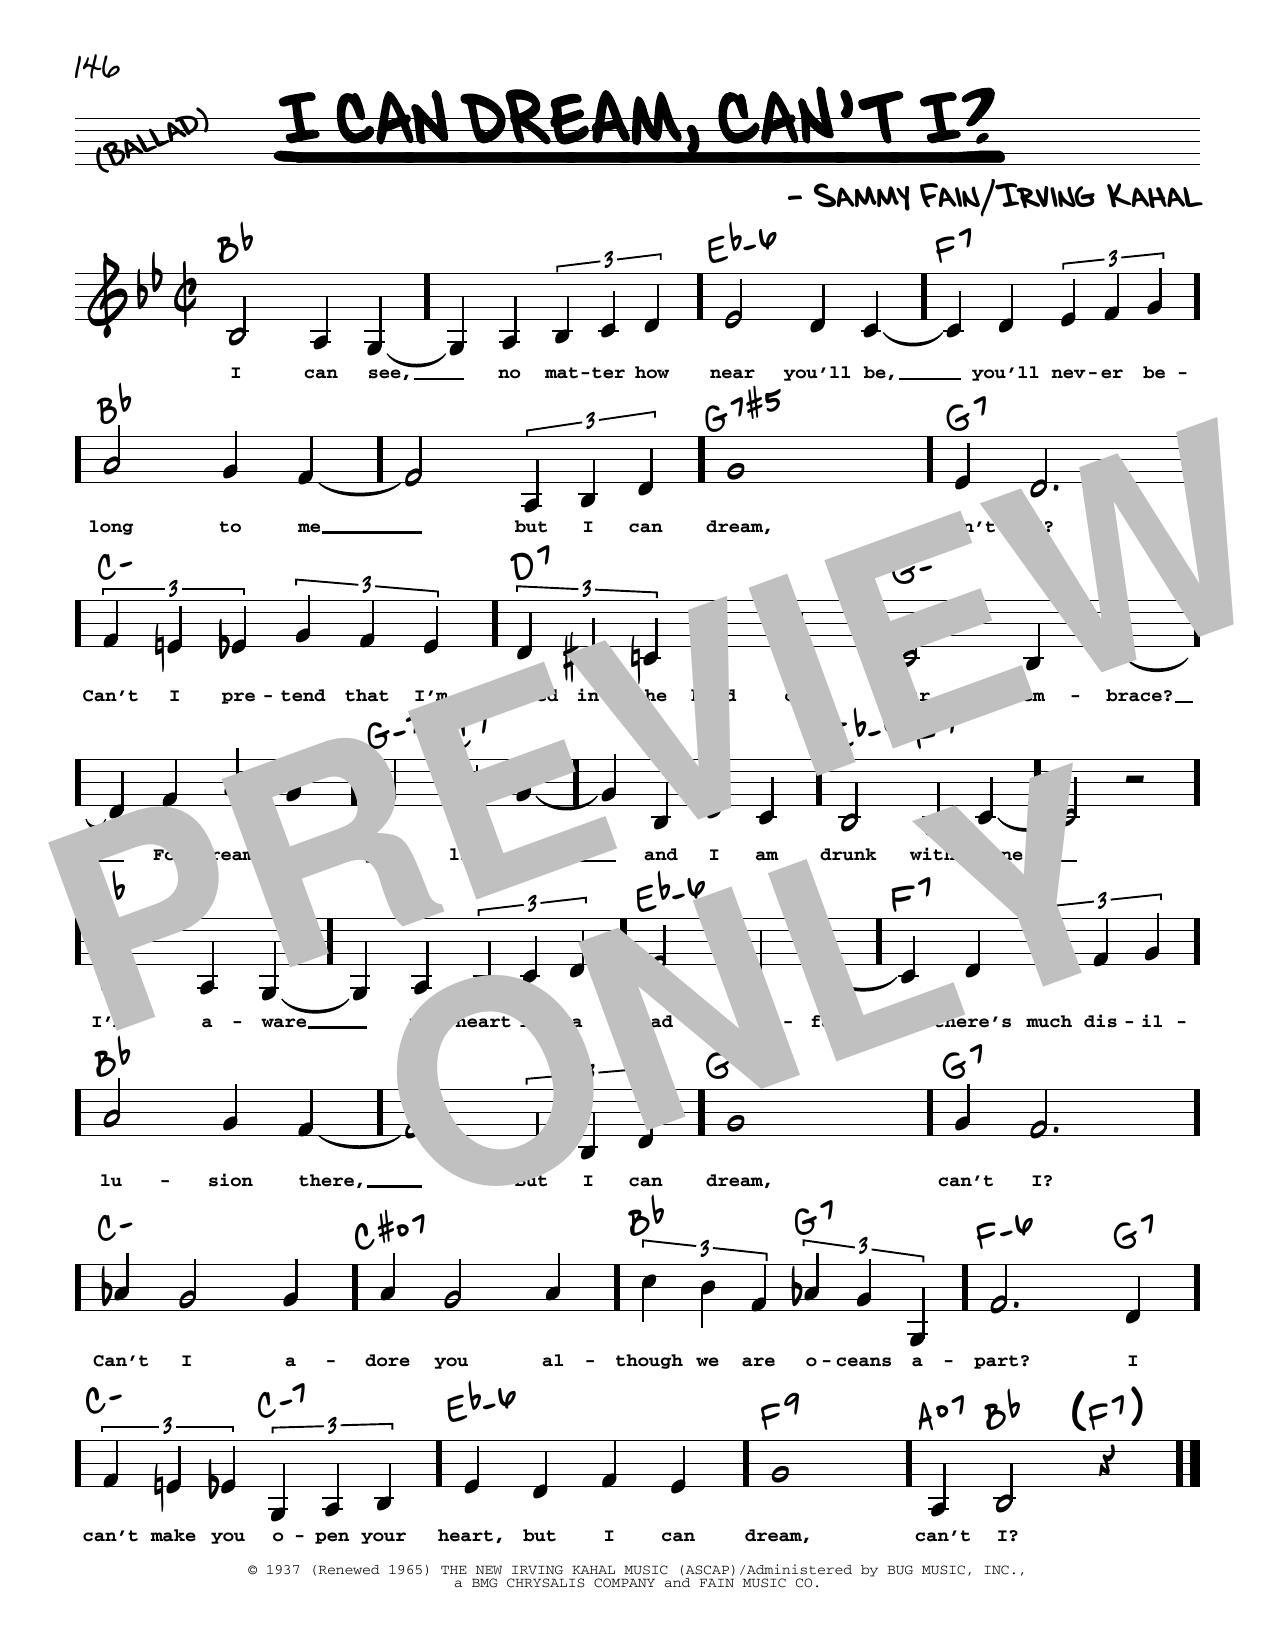 Sammy Fain I Can Dream, Can't I? (Low Voice) sheet music notes printable PDF score